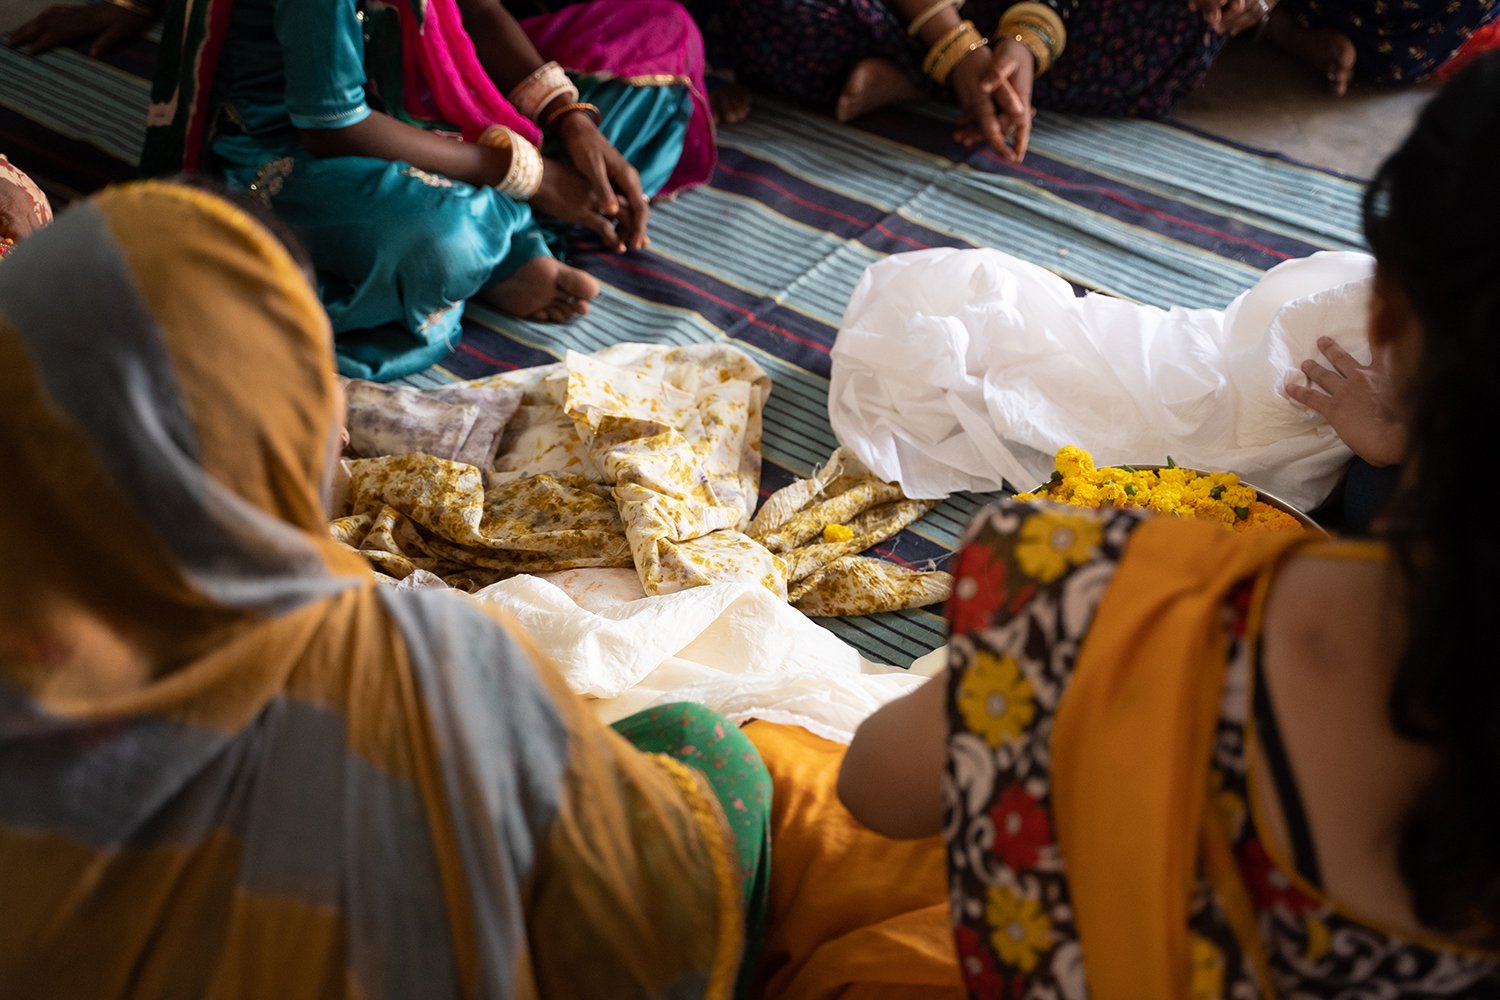 Eco-printing training with the women at Saheli (Image by Jack Howard)